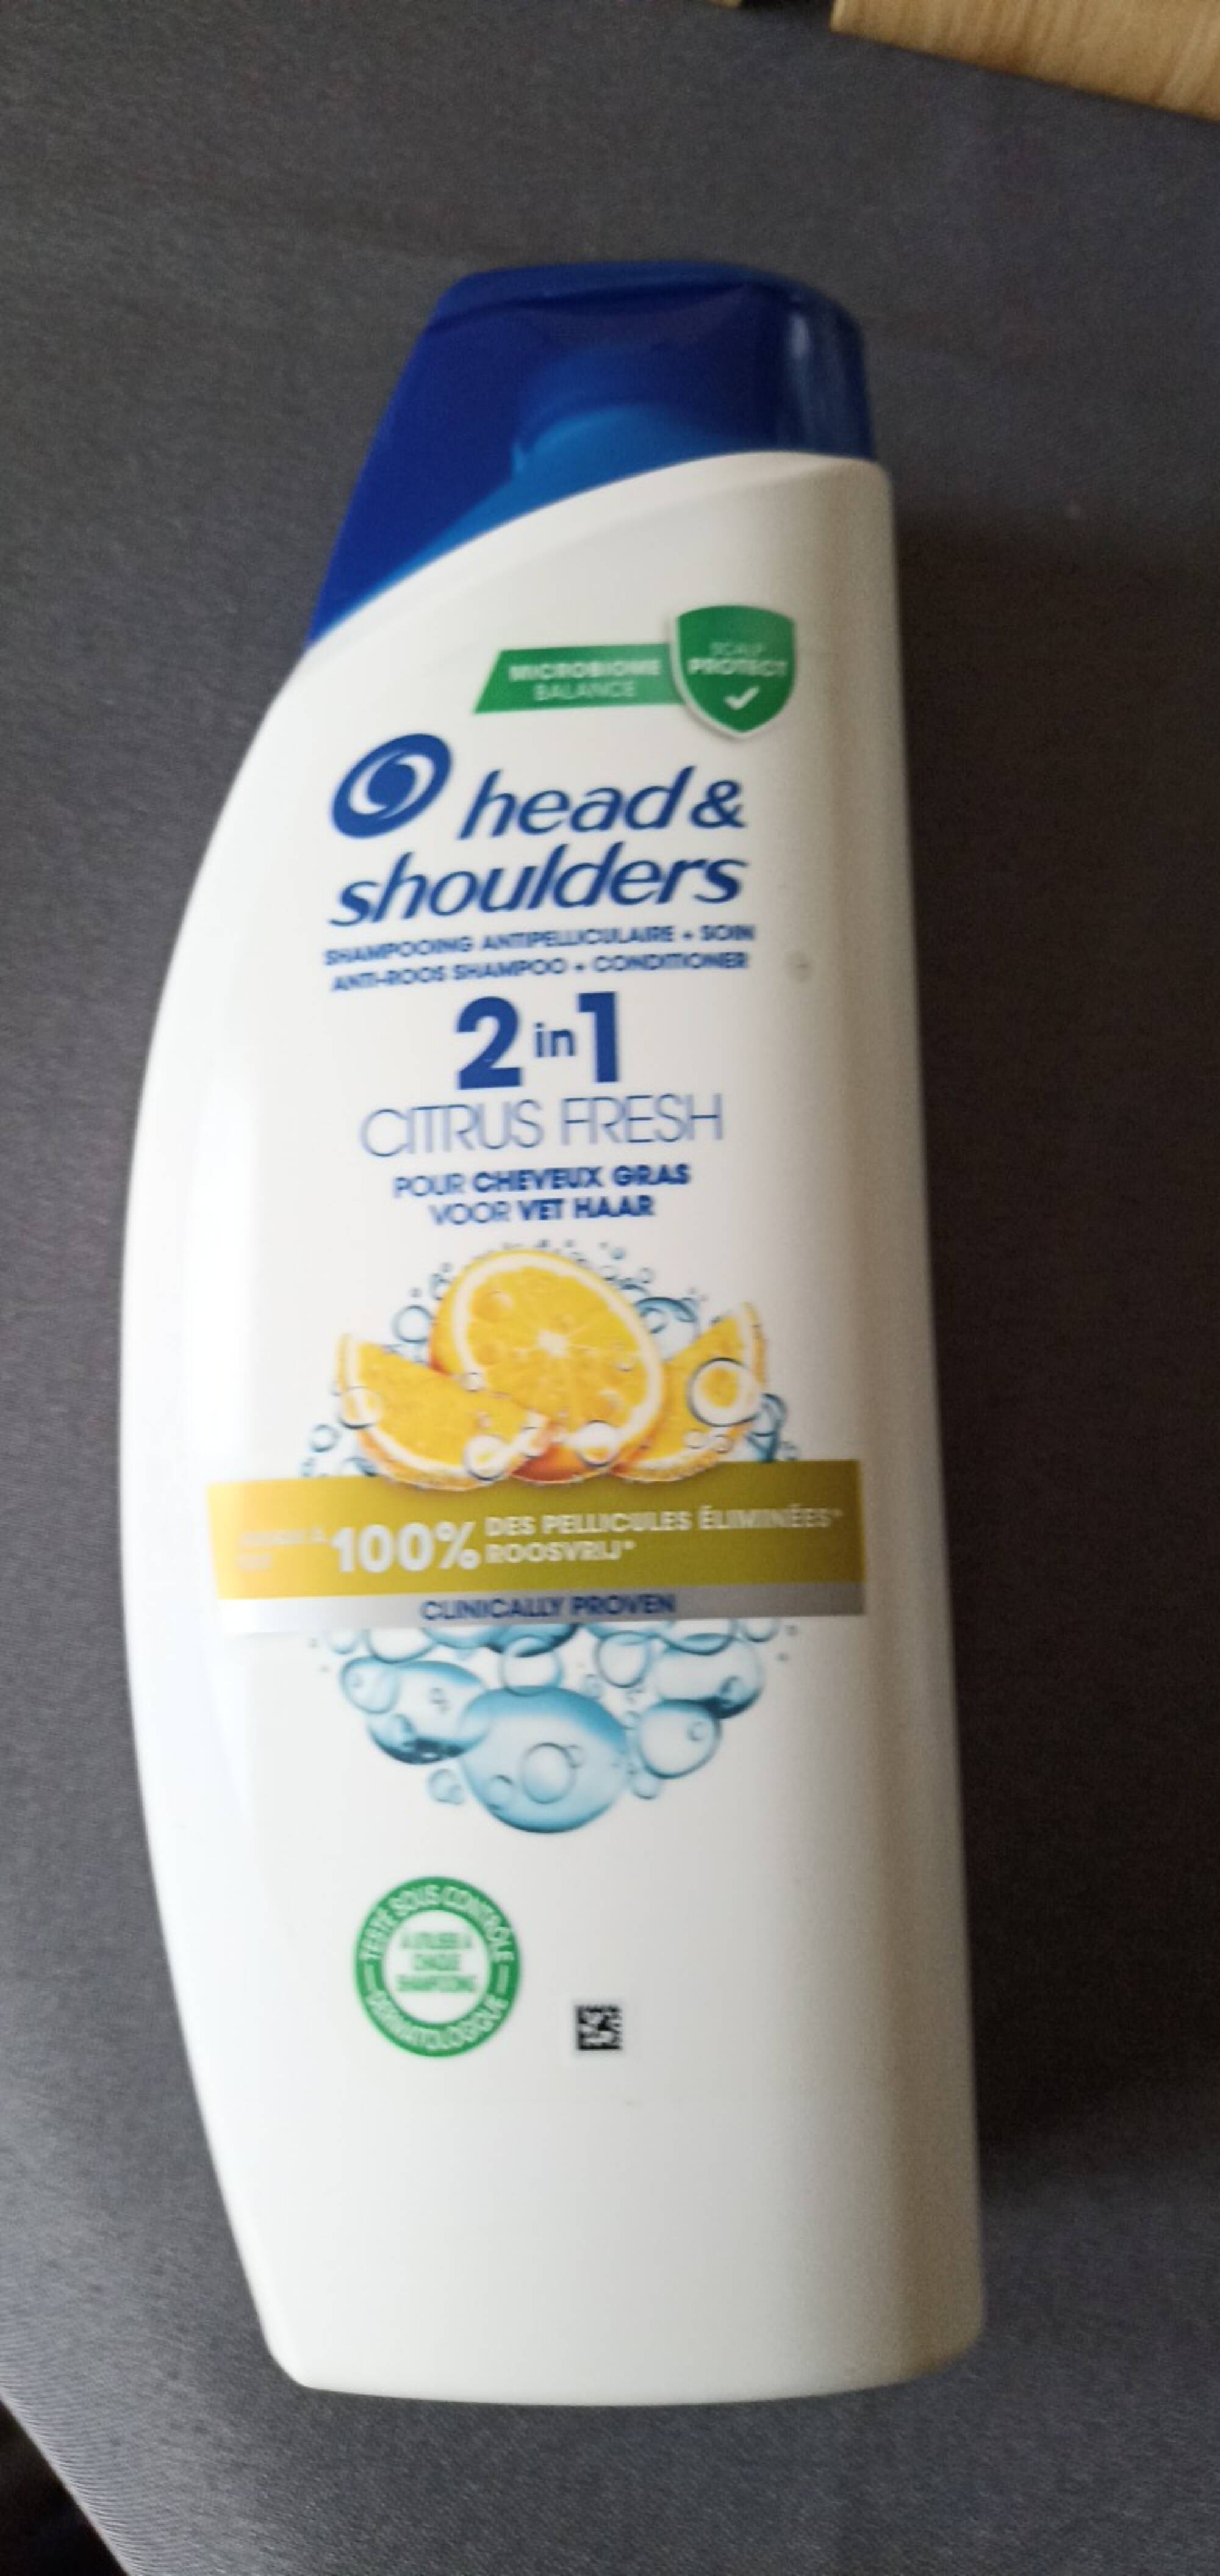 HEAD & SHOULDERS - 2 in 1 Citrus fresh - Shampooing antipelliculaire + soin